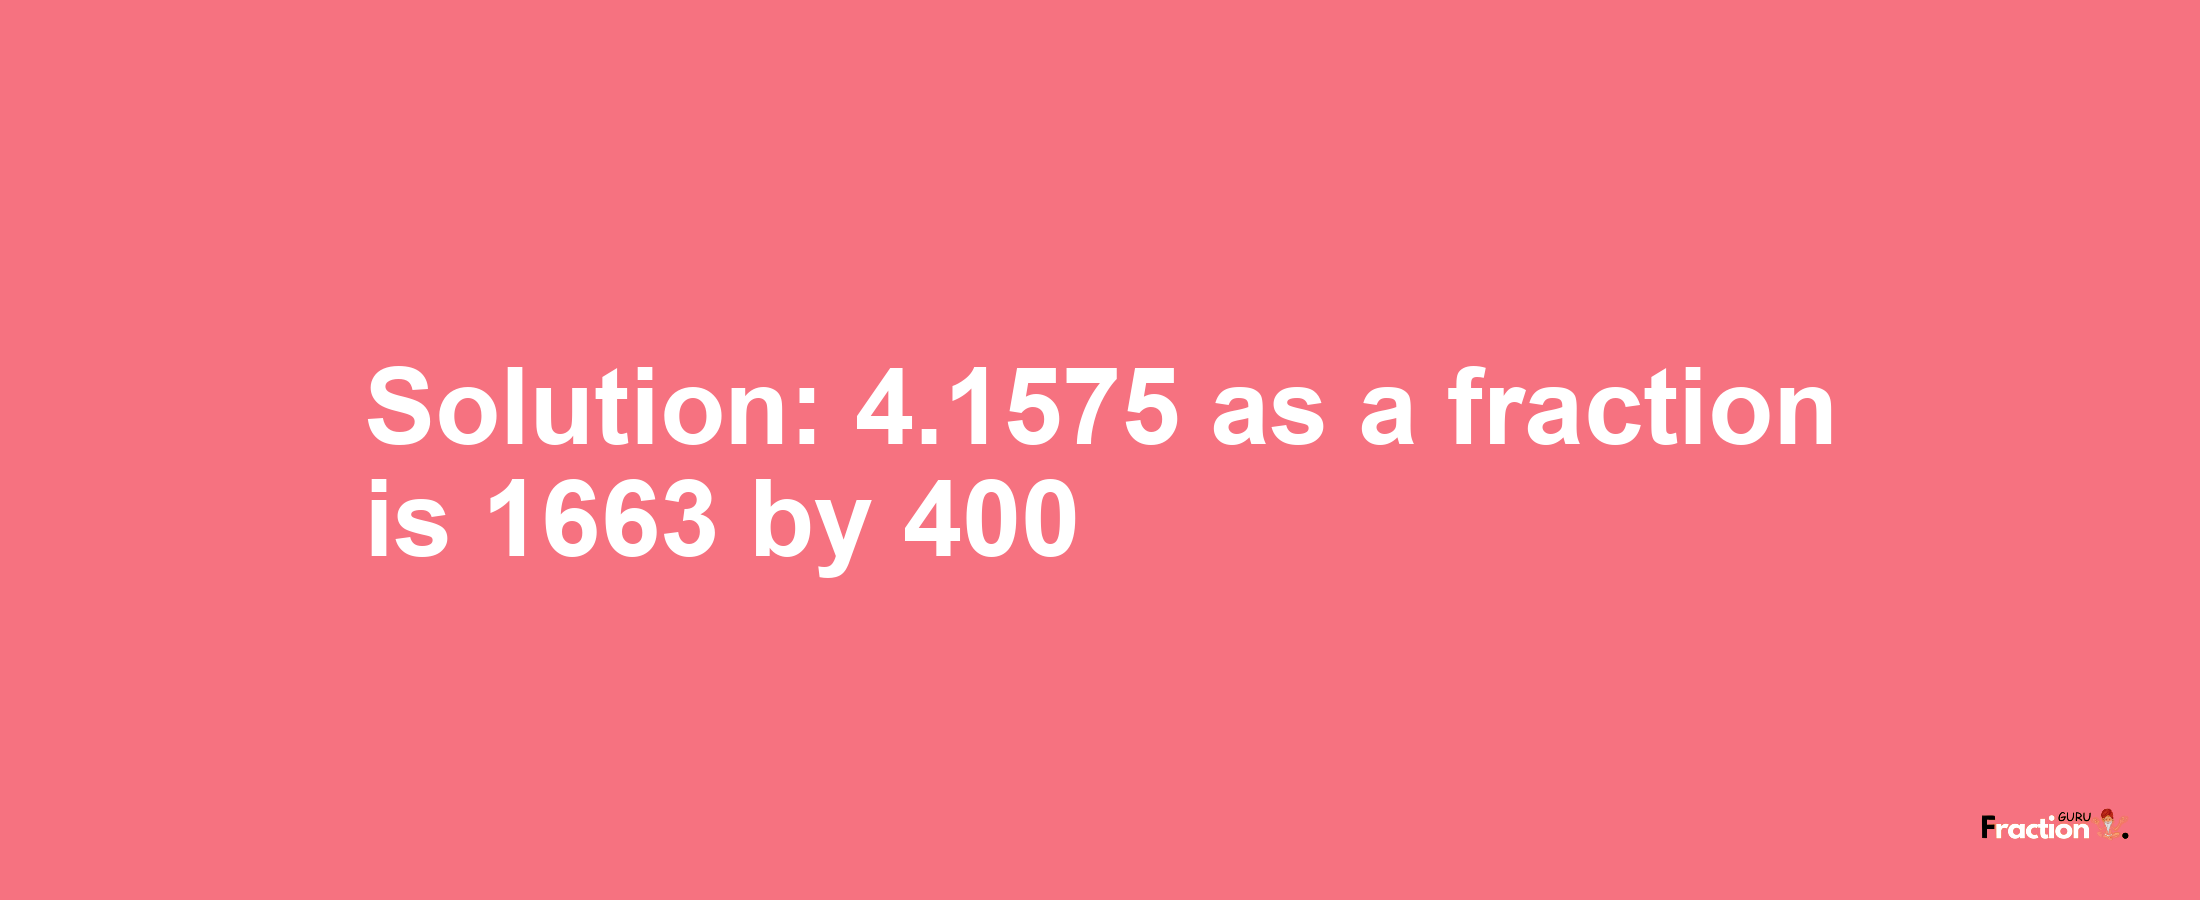 Solution:4.1575 as a fraction is 1663/400